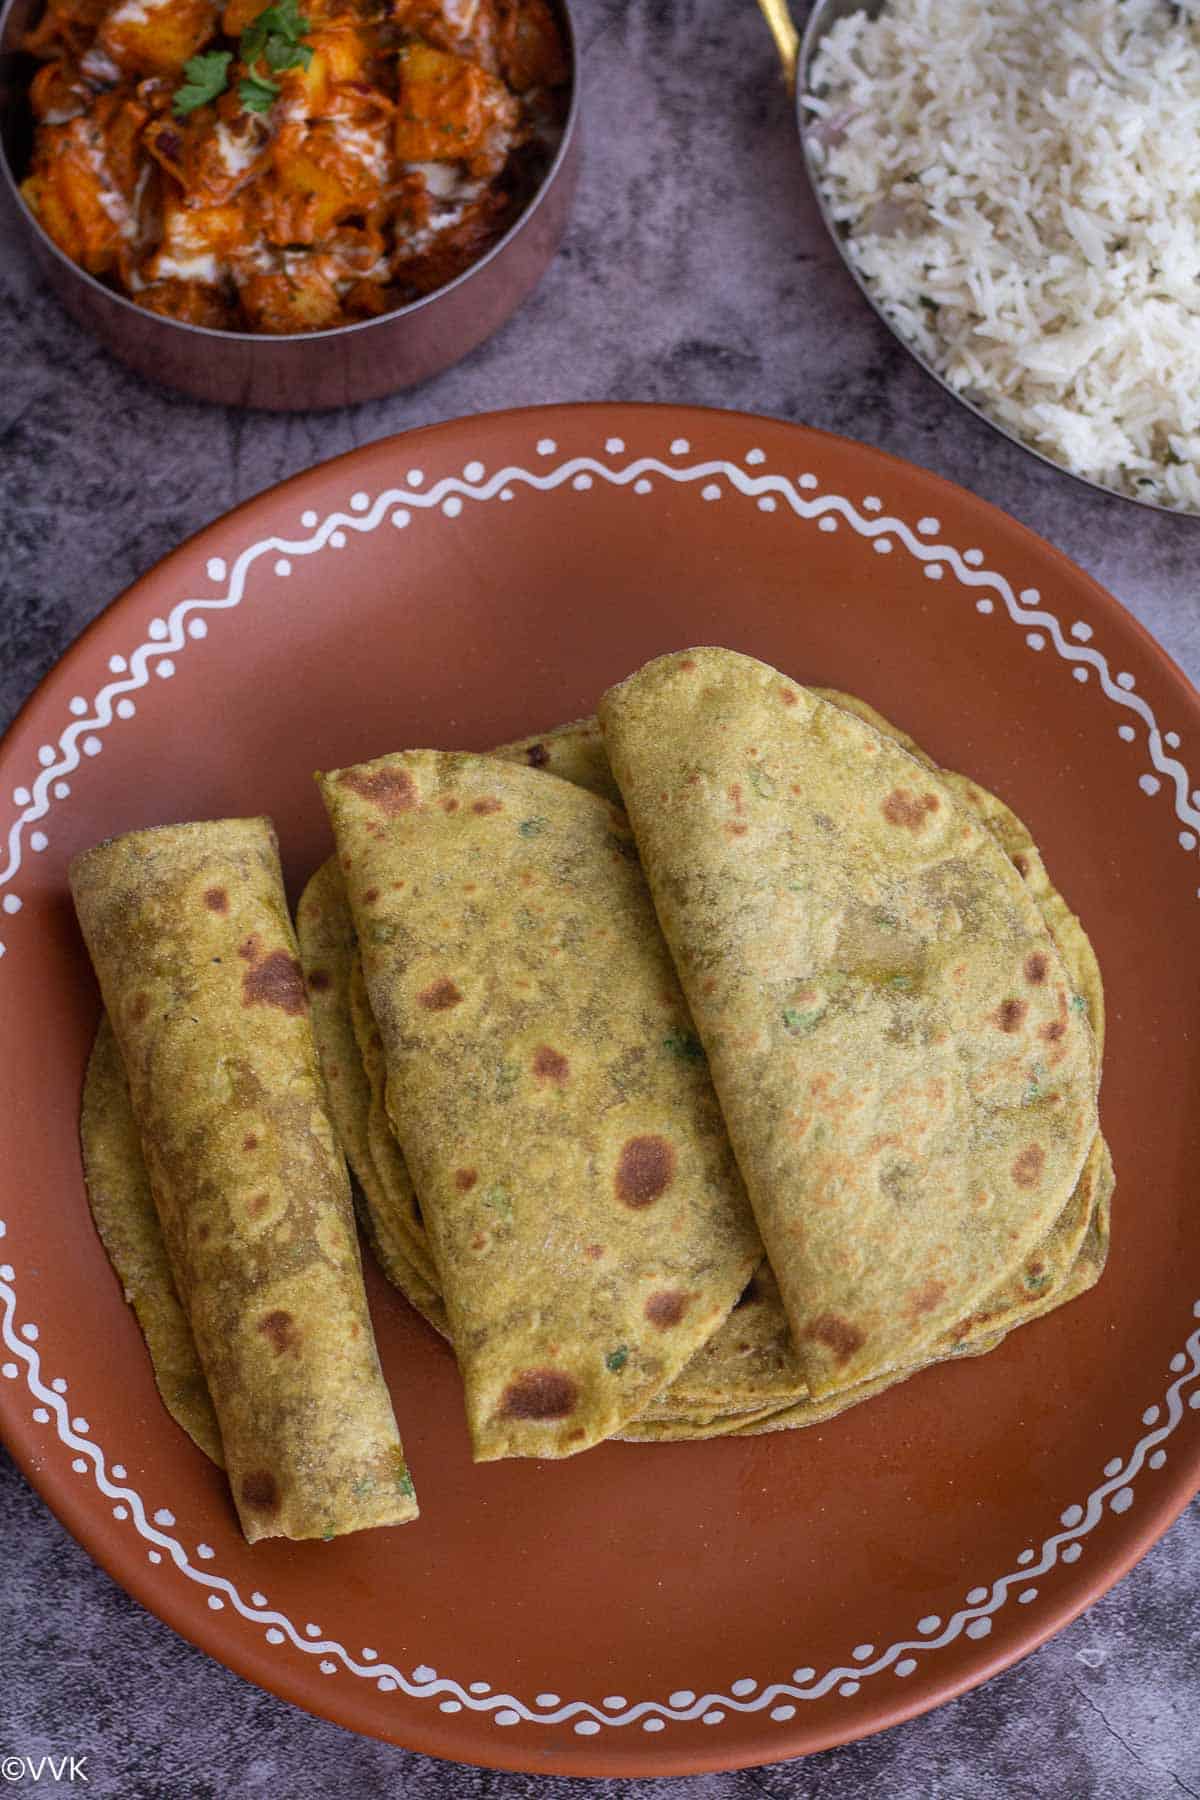 avocado chapati folded and placed on a terracotta plate with rice and curry on the side